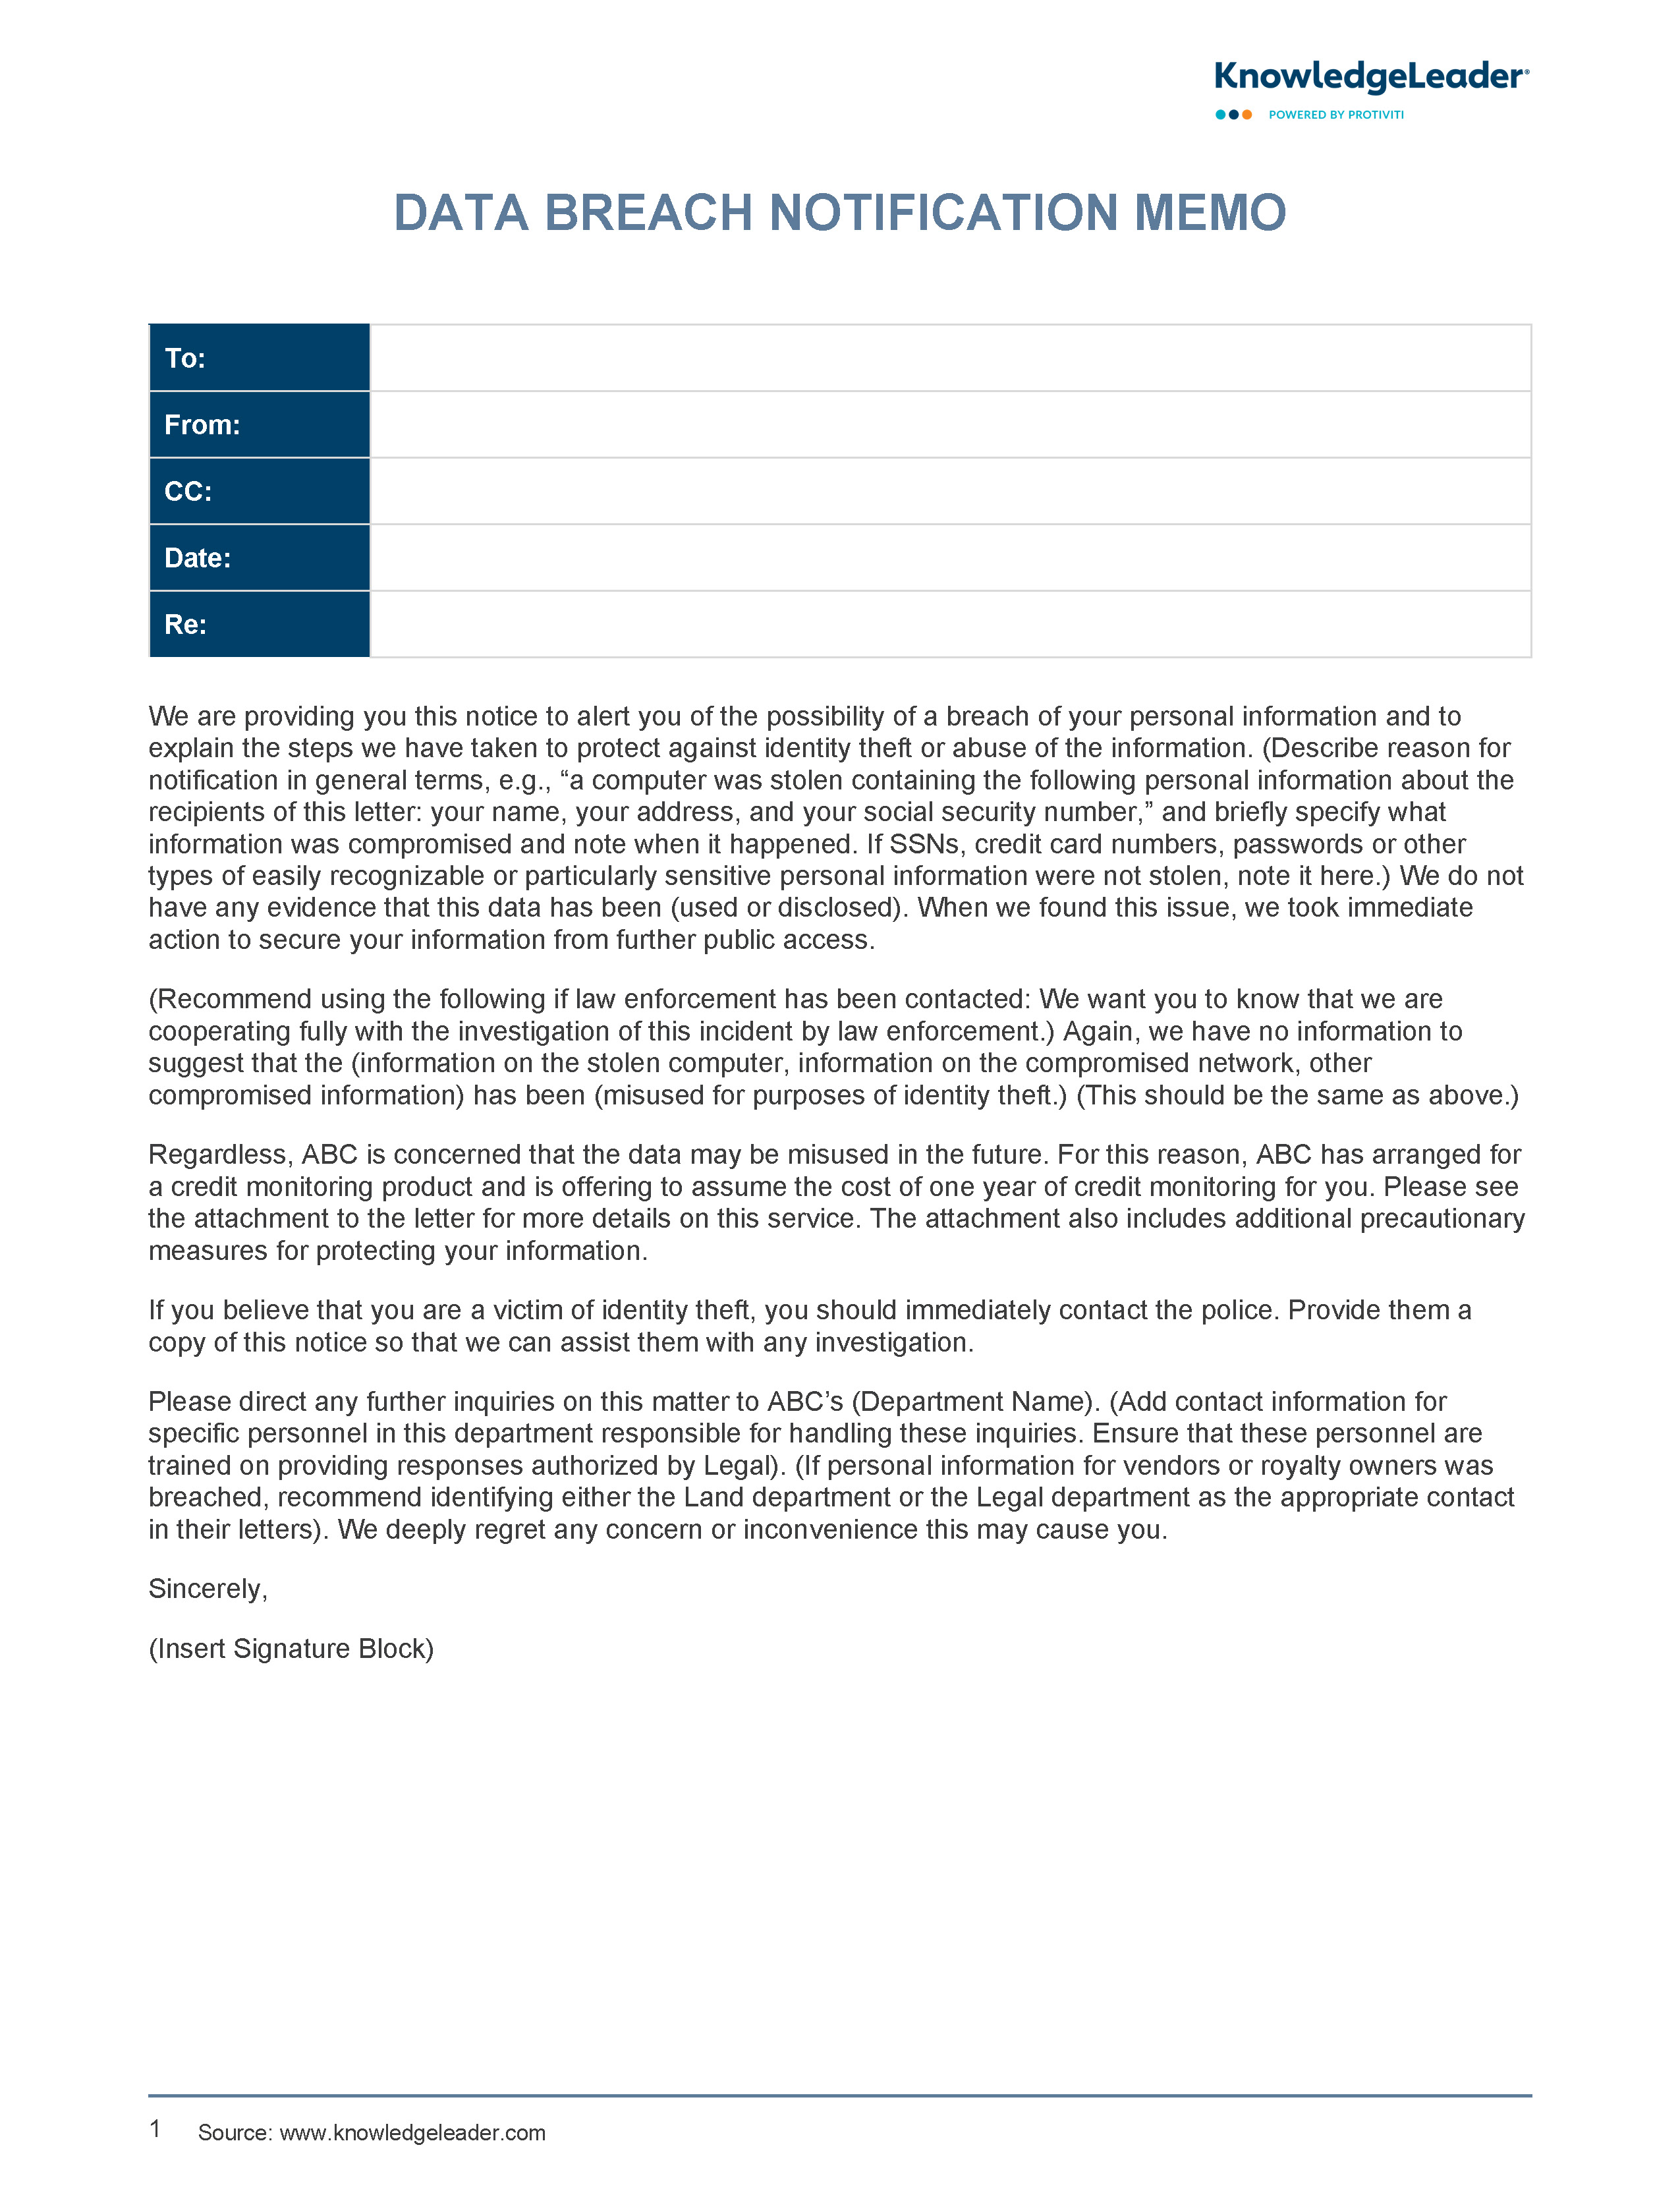 Screenshot of the first page of Data Breach Notification Letter Template Memo